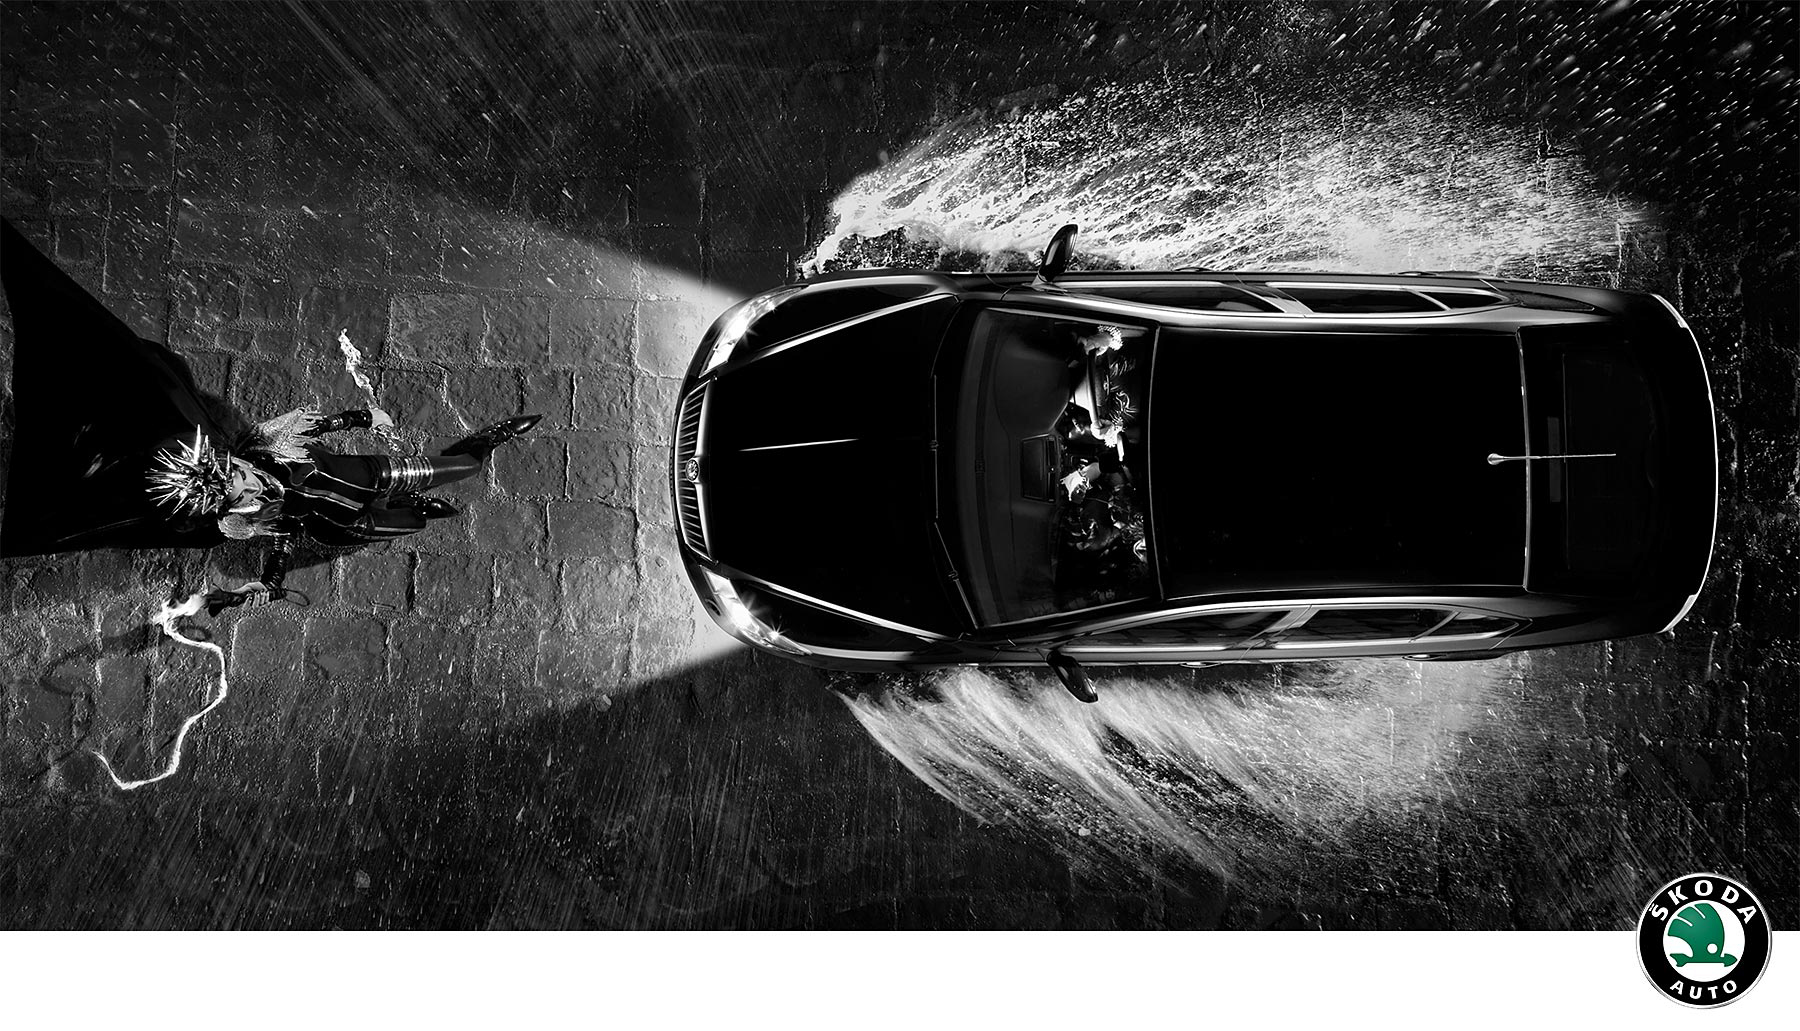 Best Commercial Photographer in India Vikram Bawa, Photography car campaign for Skoda Laura, Model, Car Photographer, Concept, Commercial Photographer, B&W Spider Awards, Best Advertising Photographers Worldwide by Lürzer